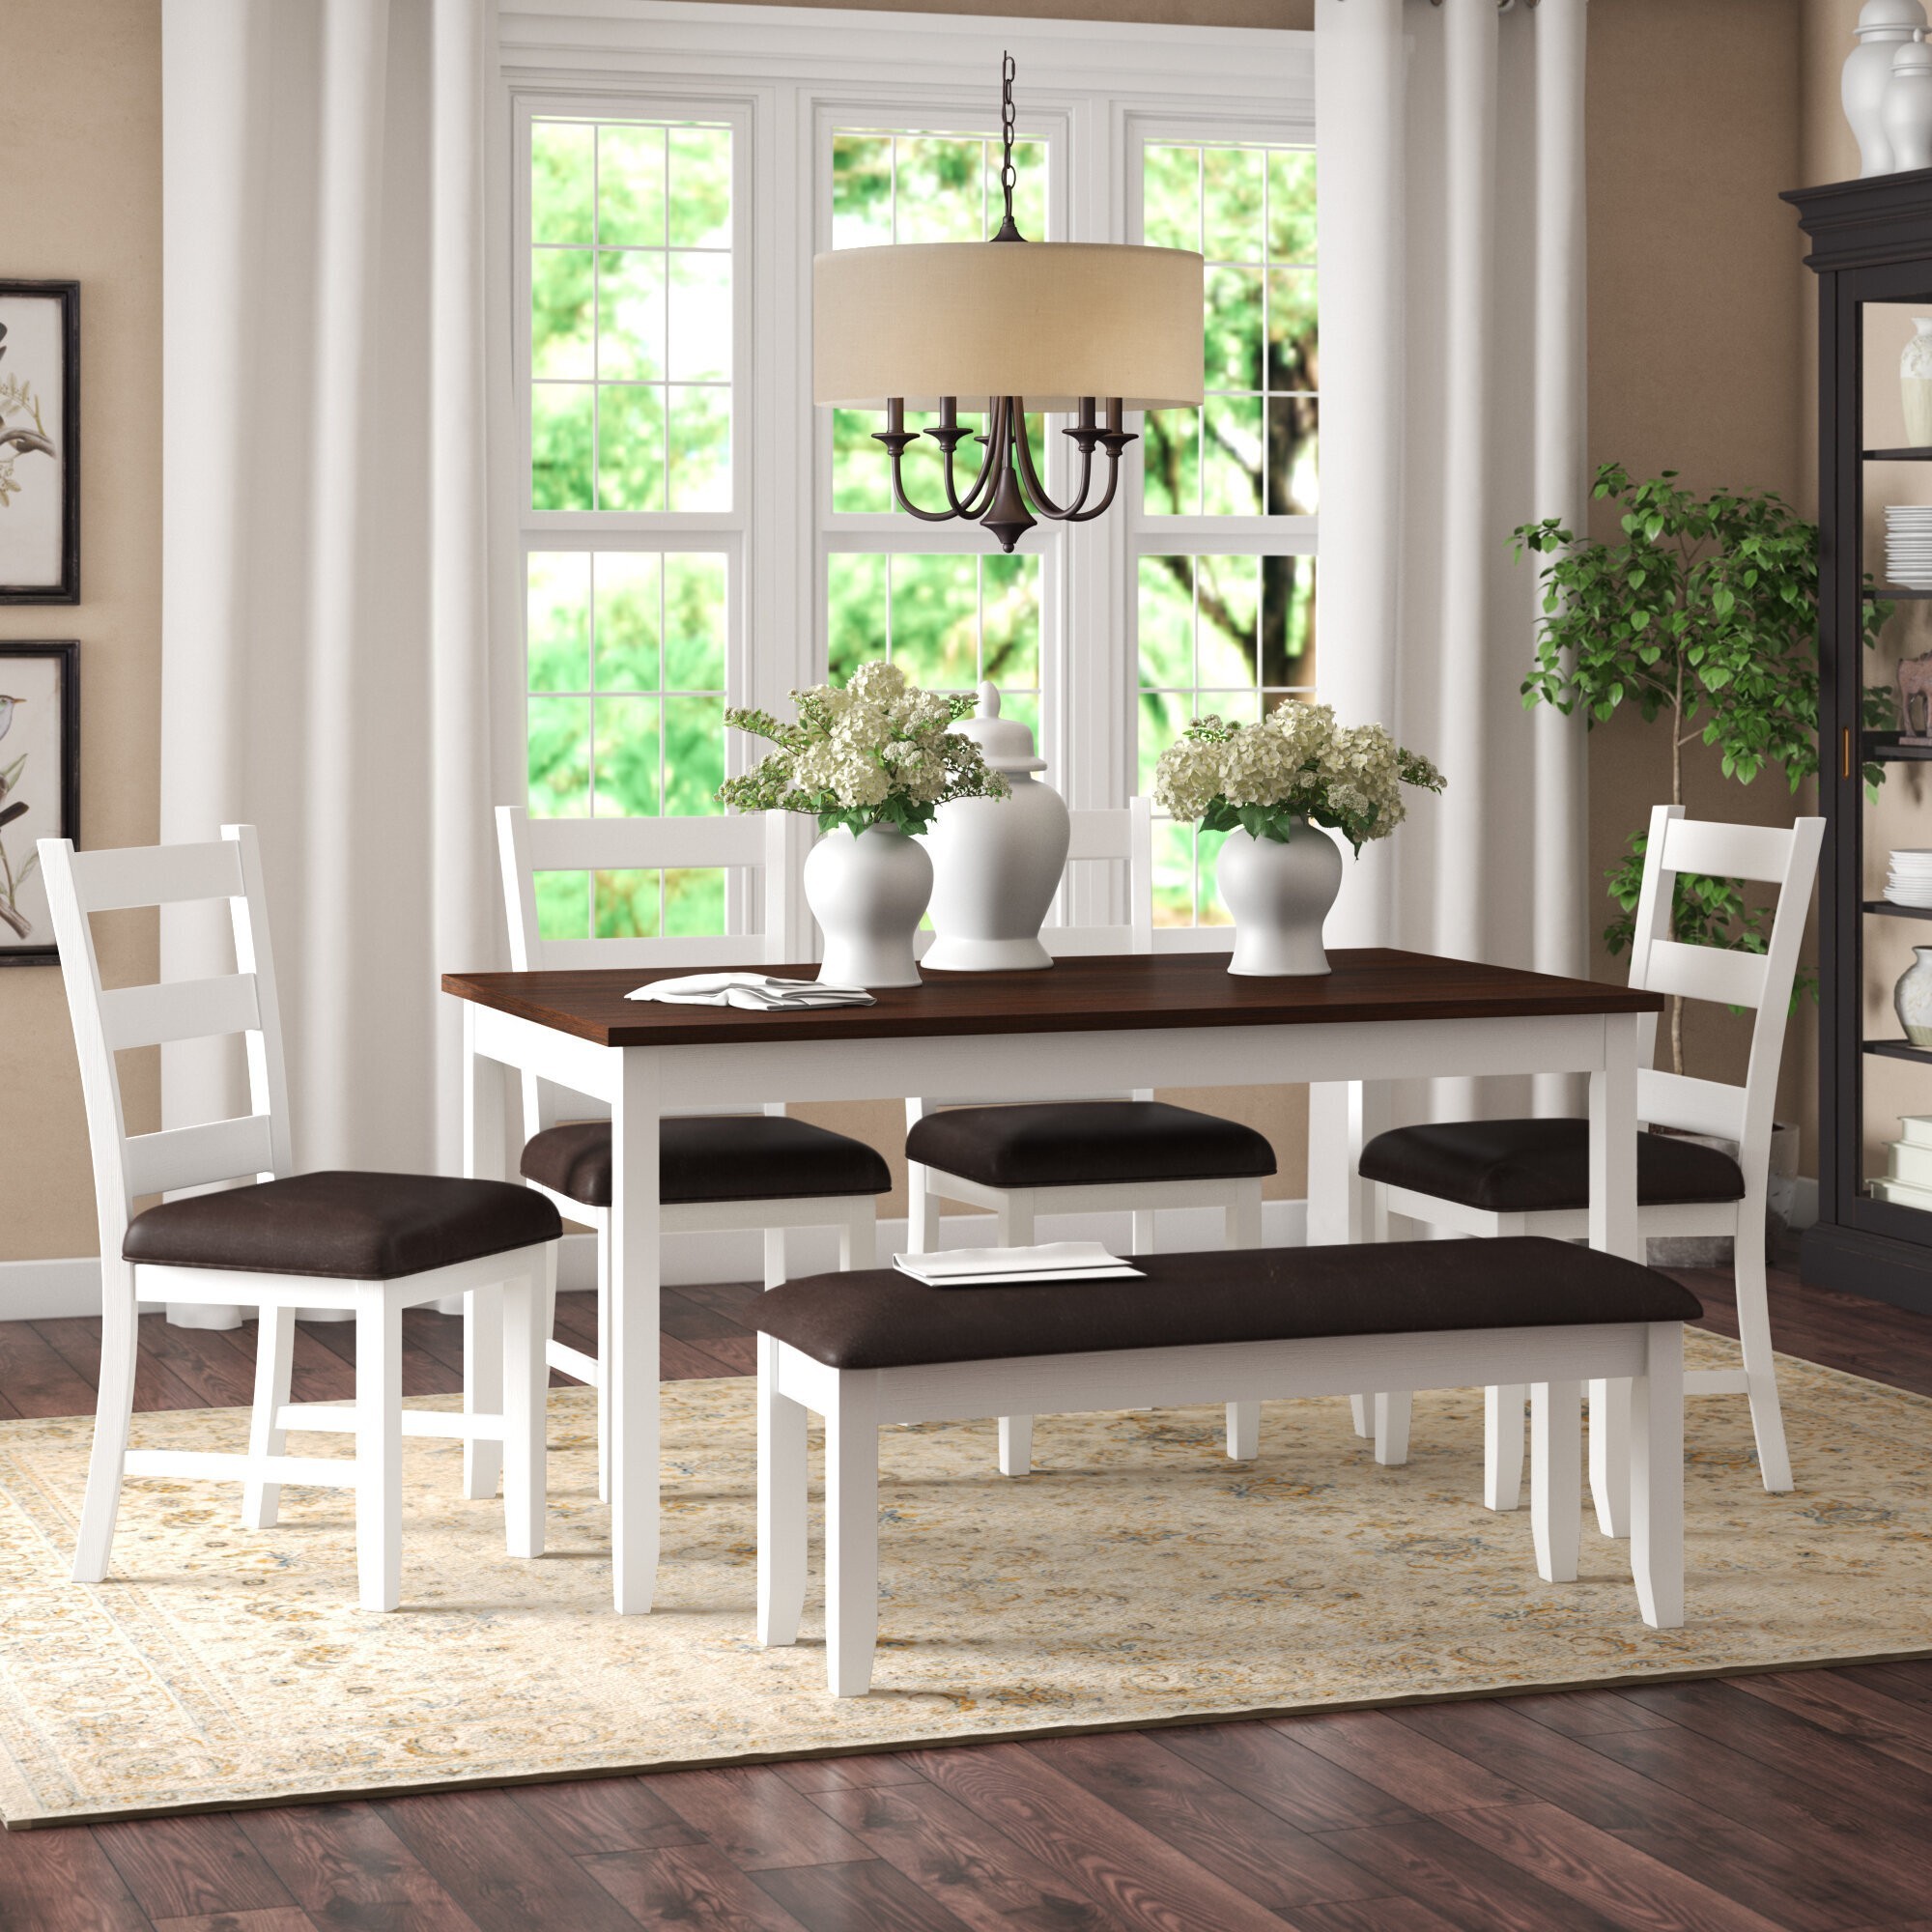 How To Choose A Dinettes And Breakfast Nook - Foter